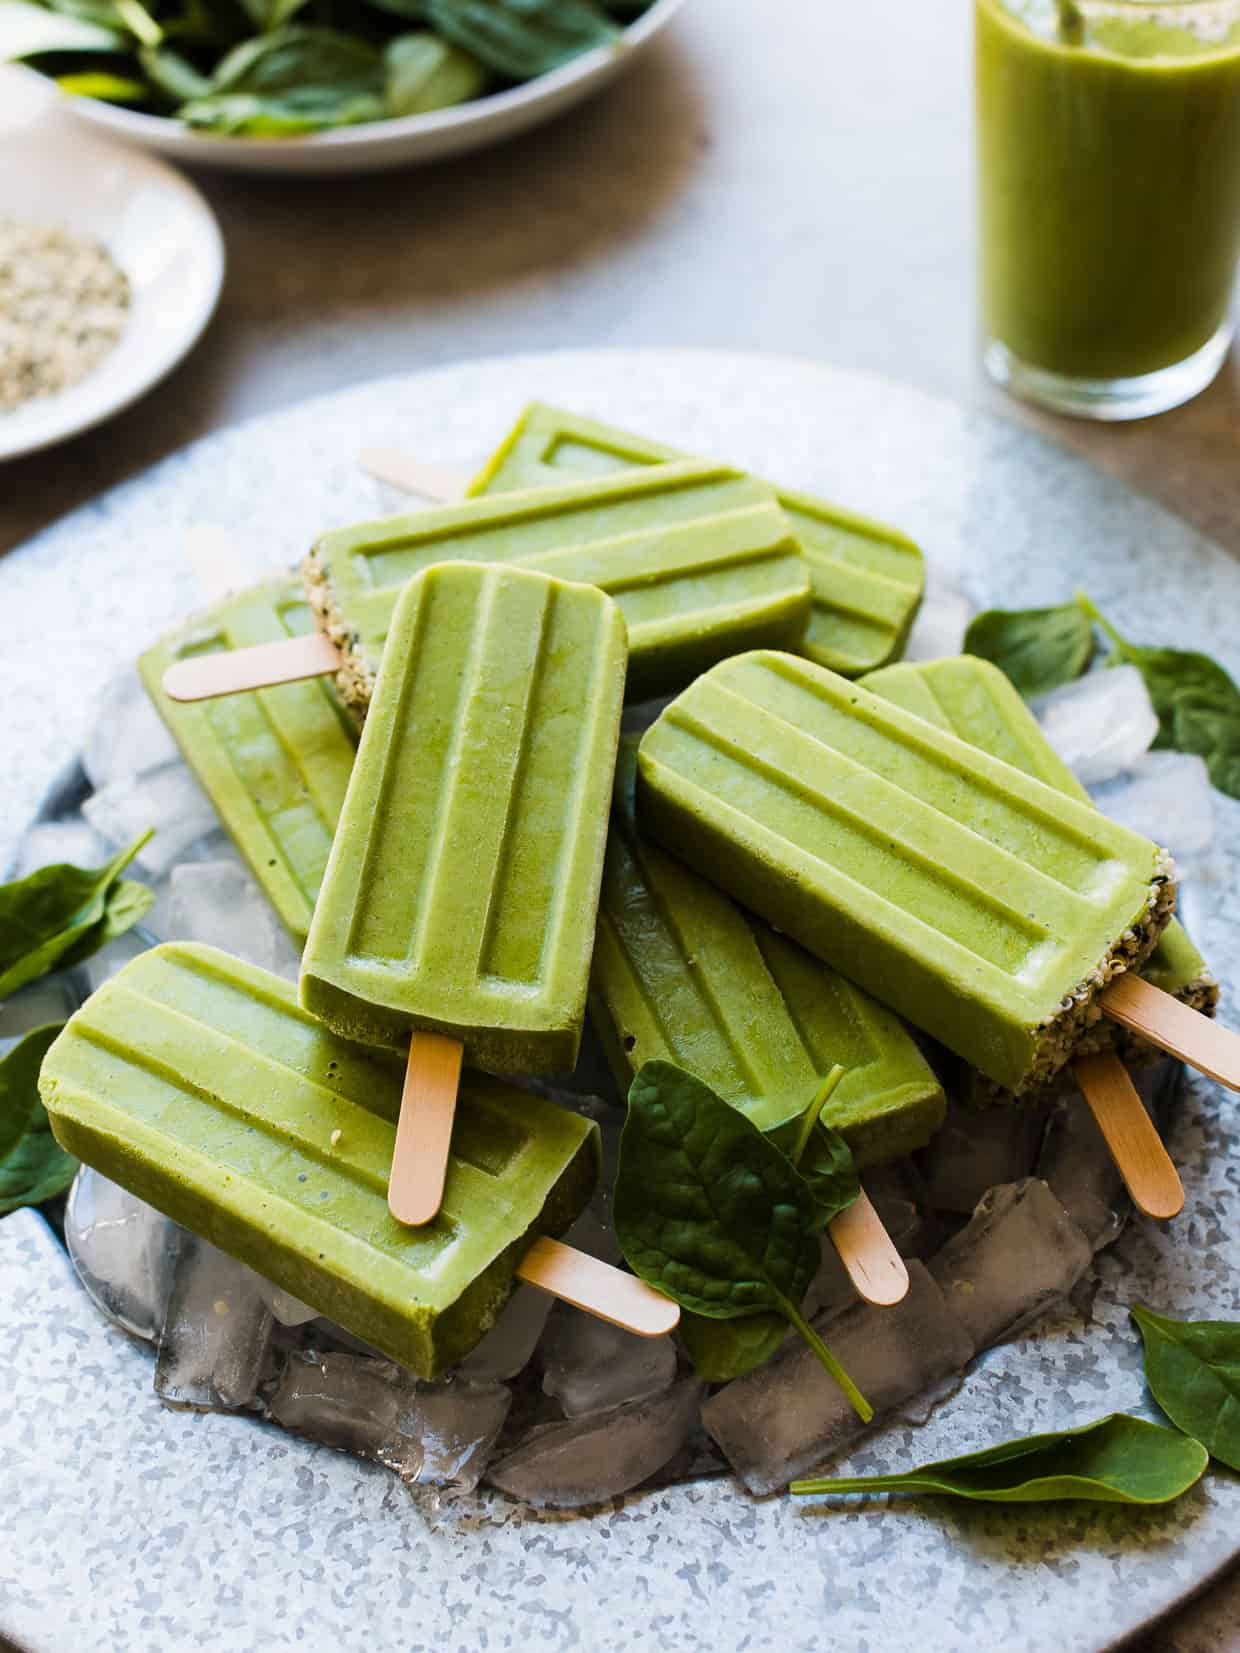 Green Smoothie Popsicles on a platter with ice cubes and fresh baby spinach leaves for garnish.